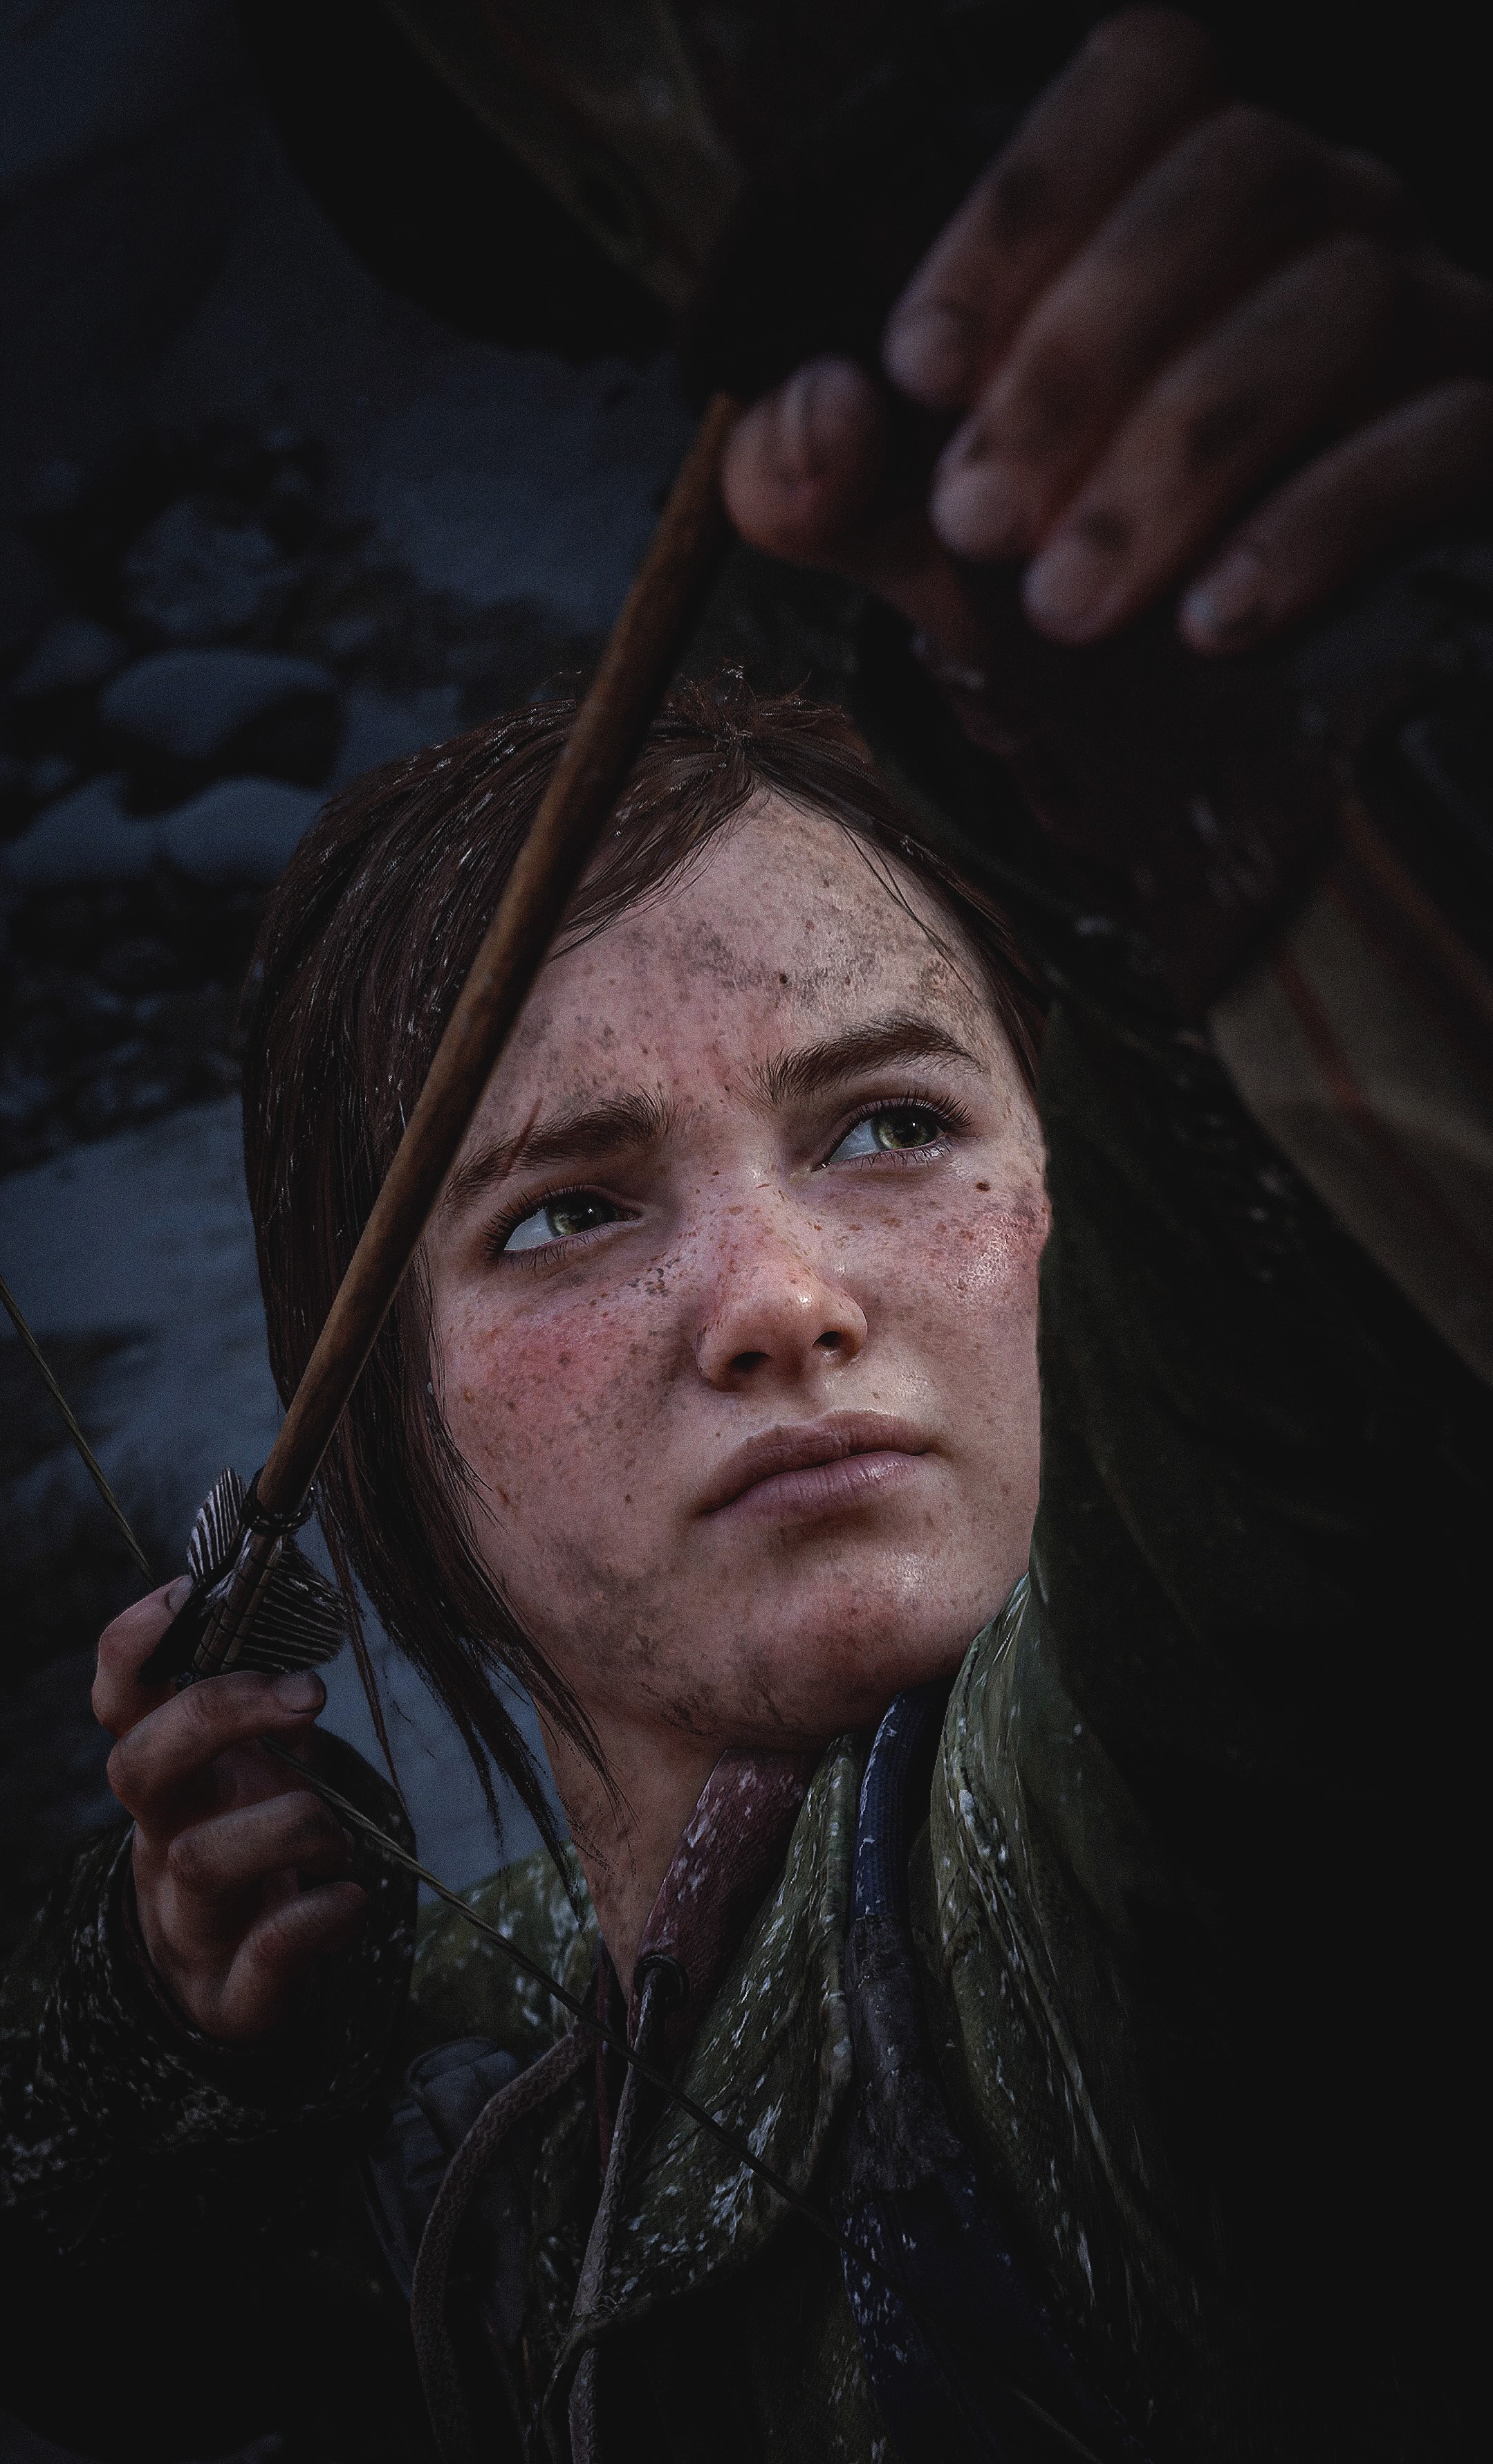 General 2159x3562 The Last of Us Ellie Williams PlayStation Playstation 5 video games video game characters Sony Naughty Dog CGI video game girls